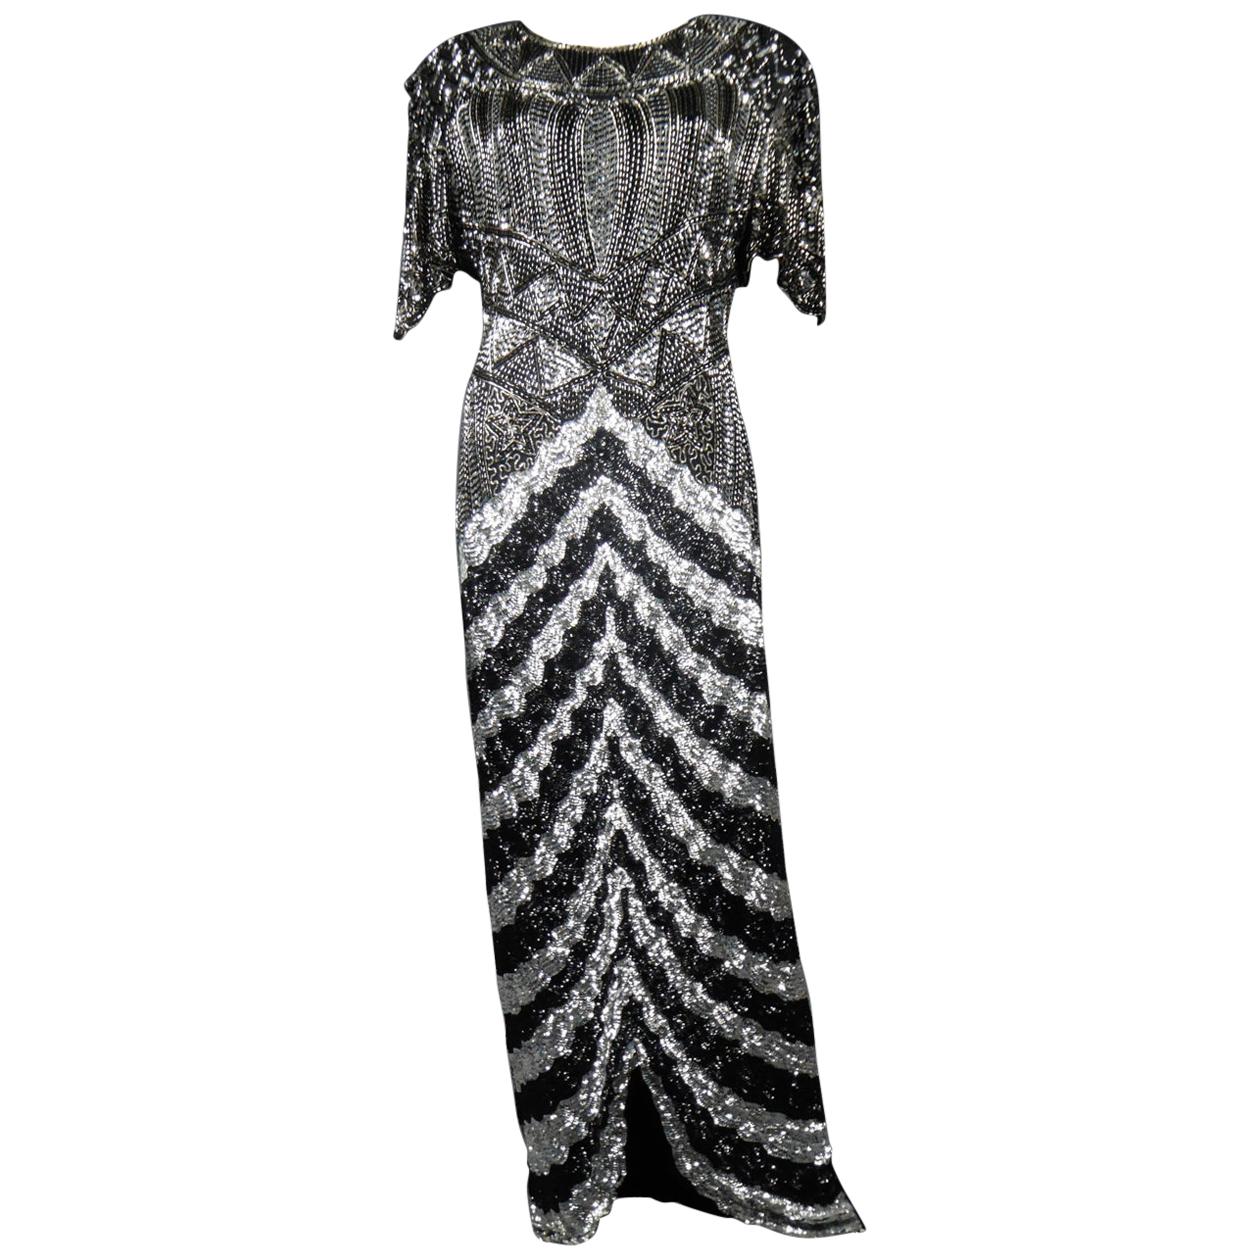 Music-Hall Evening Dress Embroidered with Black and Silver Sequins ...